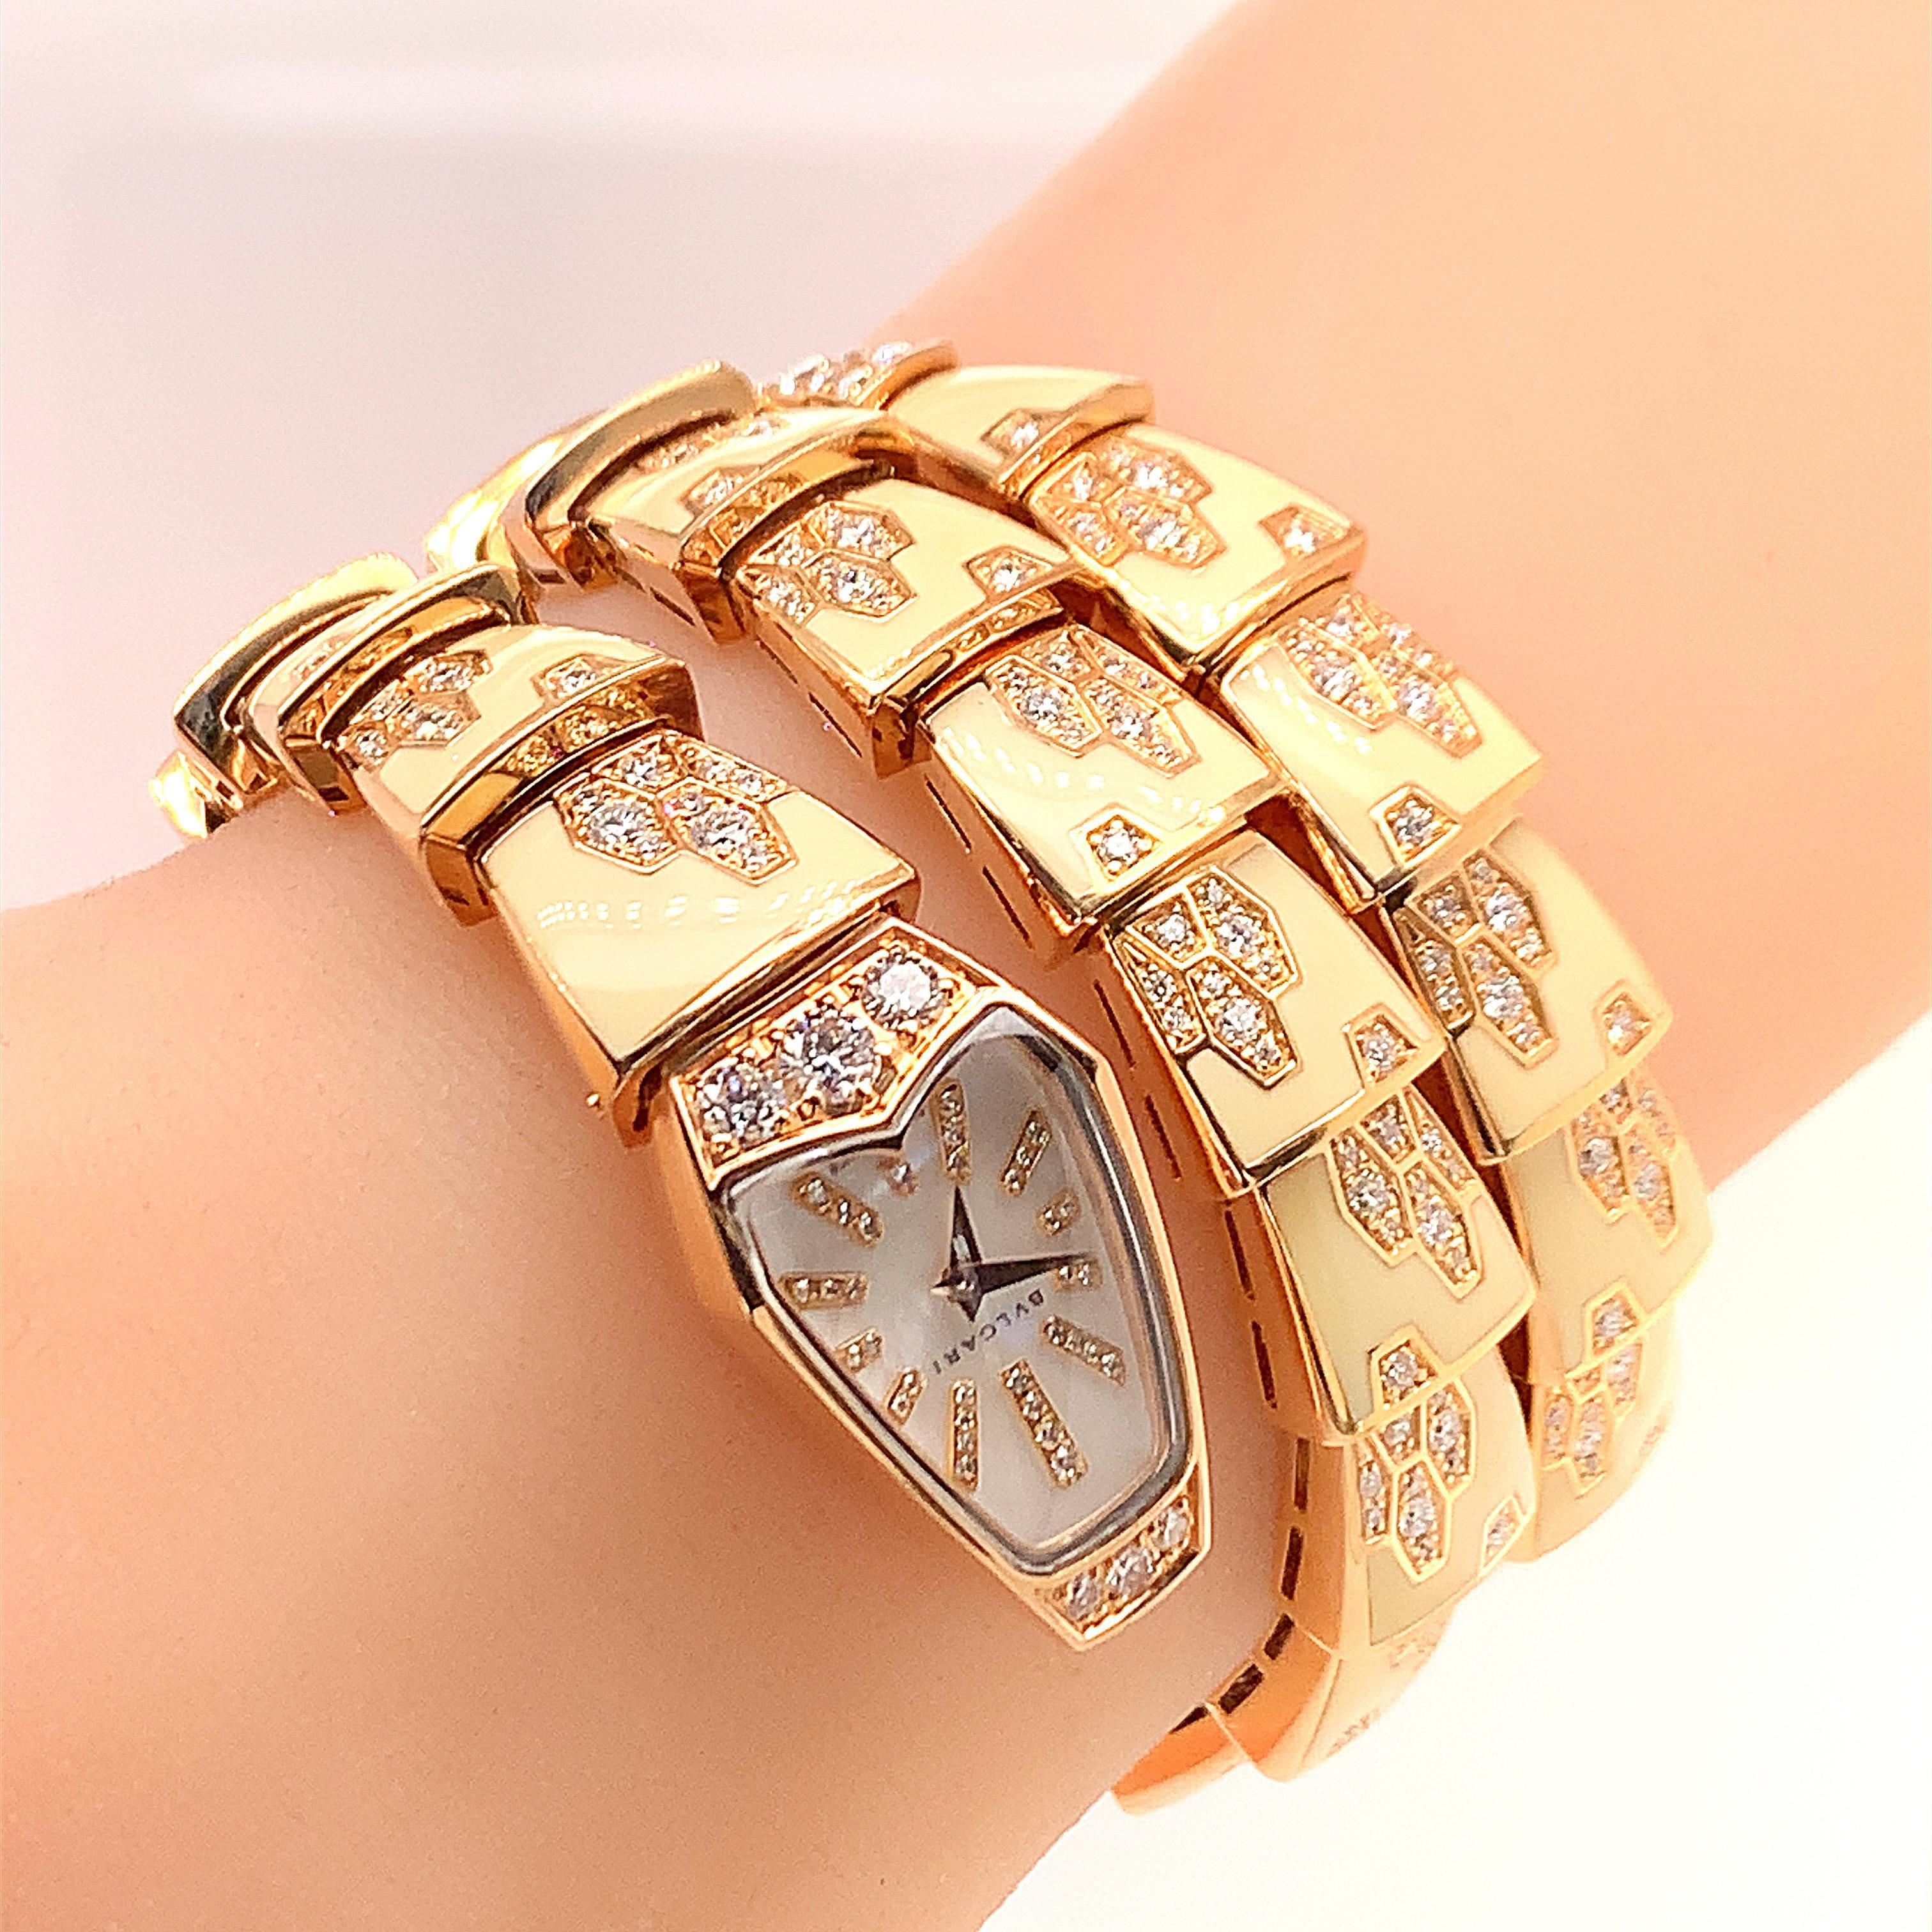 18K Pink gold diamond and enamel coil bracelet watch.  mother of pearl dial with diamond hours, stamped AU 750 18K maker's mark, BVLGARI Fabrique en Suisse SP P 26 G PO 590 CMTI, weight 84.7 dwt . Brand new condition with original box and papers.